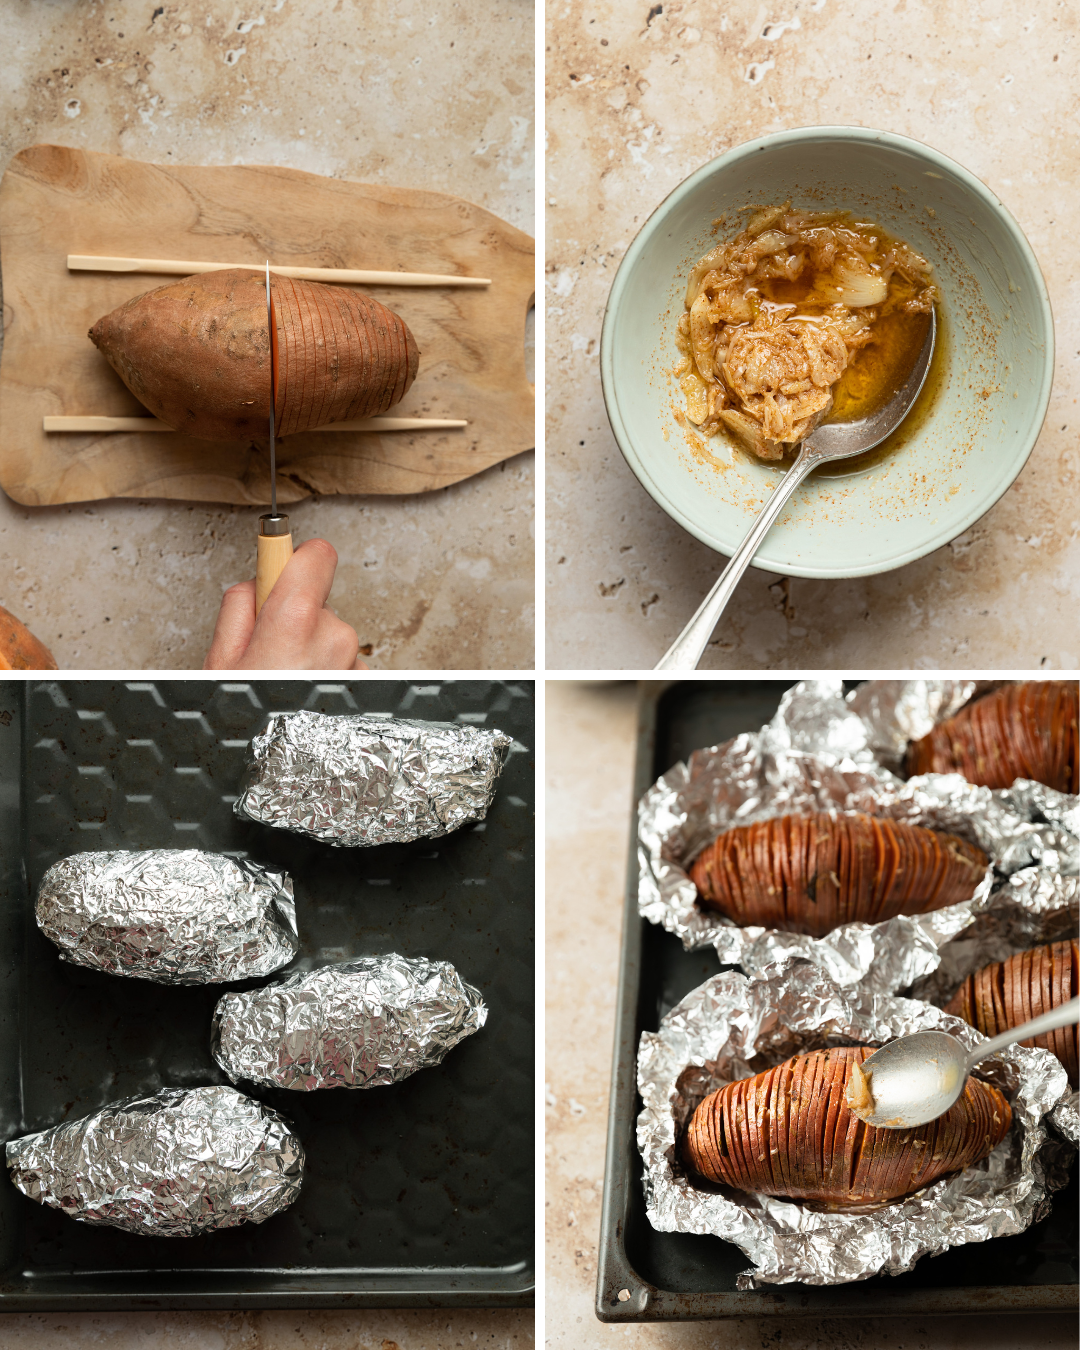 Step by step assembly of hasselback sweet potatoes